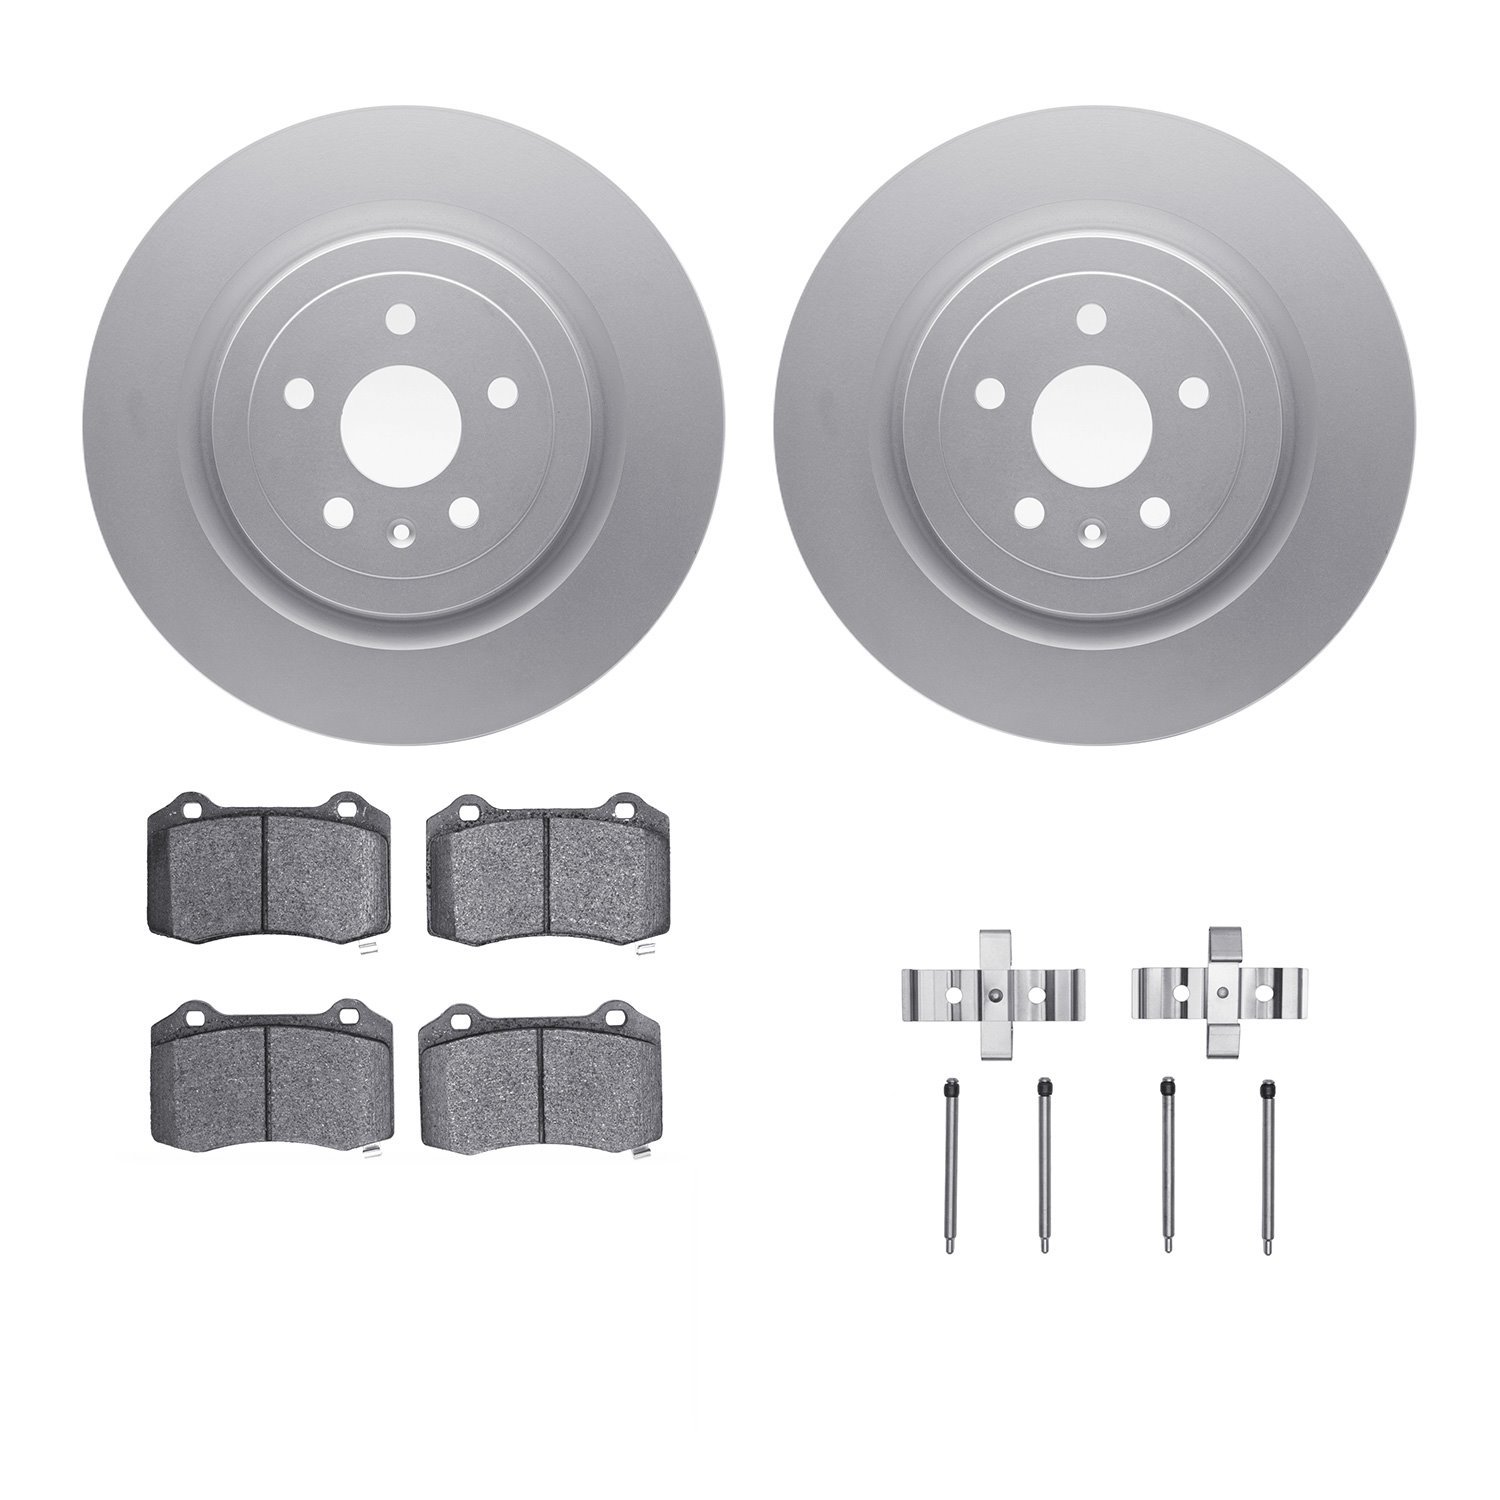 4312-47027 Geospec Brake Rotors with 3000-Series Ceramic Brake Pads & Hardware, Fits Select GM, Position: Rear